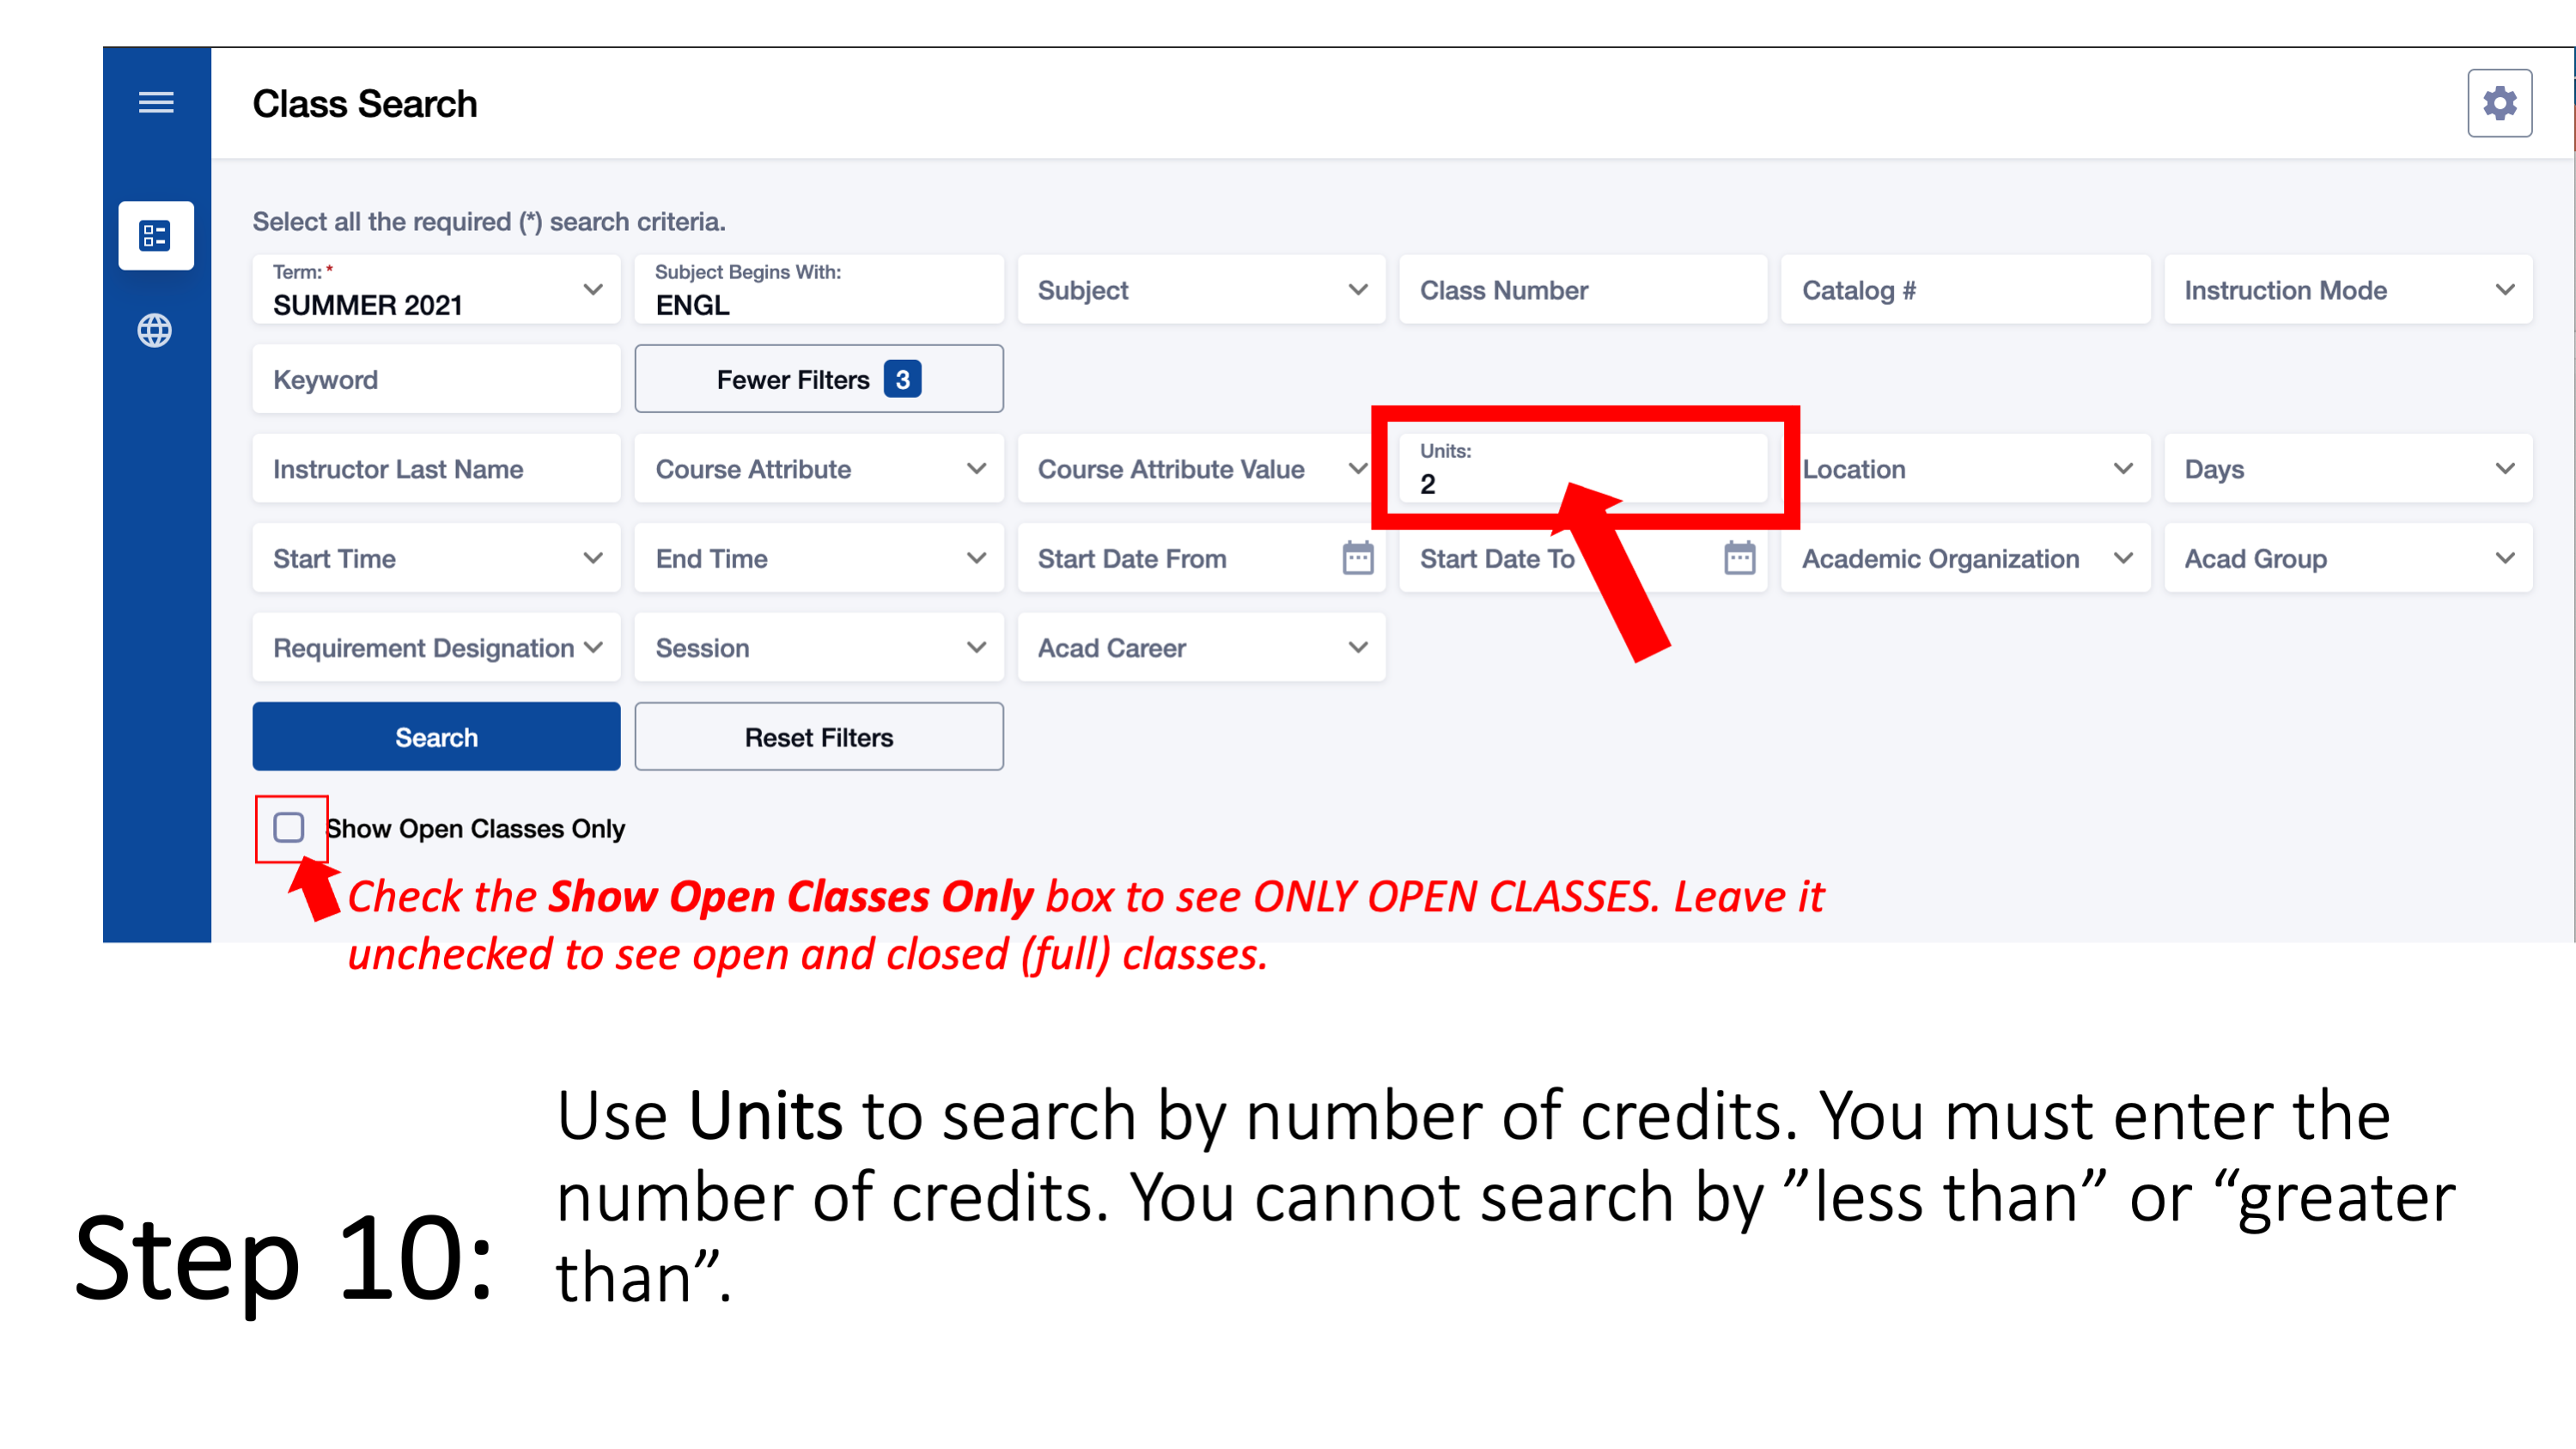 Step 10: Use Units to search by number of credits. You must enter the number of credits. You cannot search by ”less than” or “greater than”. Check the Show Open Classes Only box to see ONLY OPEN CLASSES. Leave it unchecked to see open and closed (full) classes.